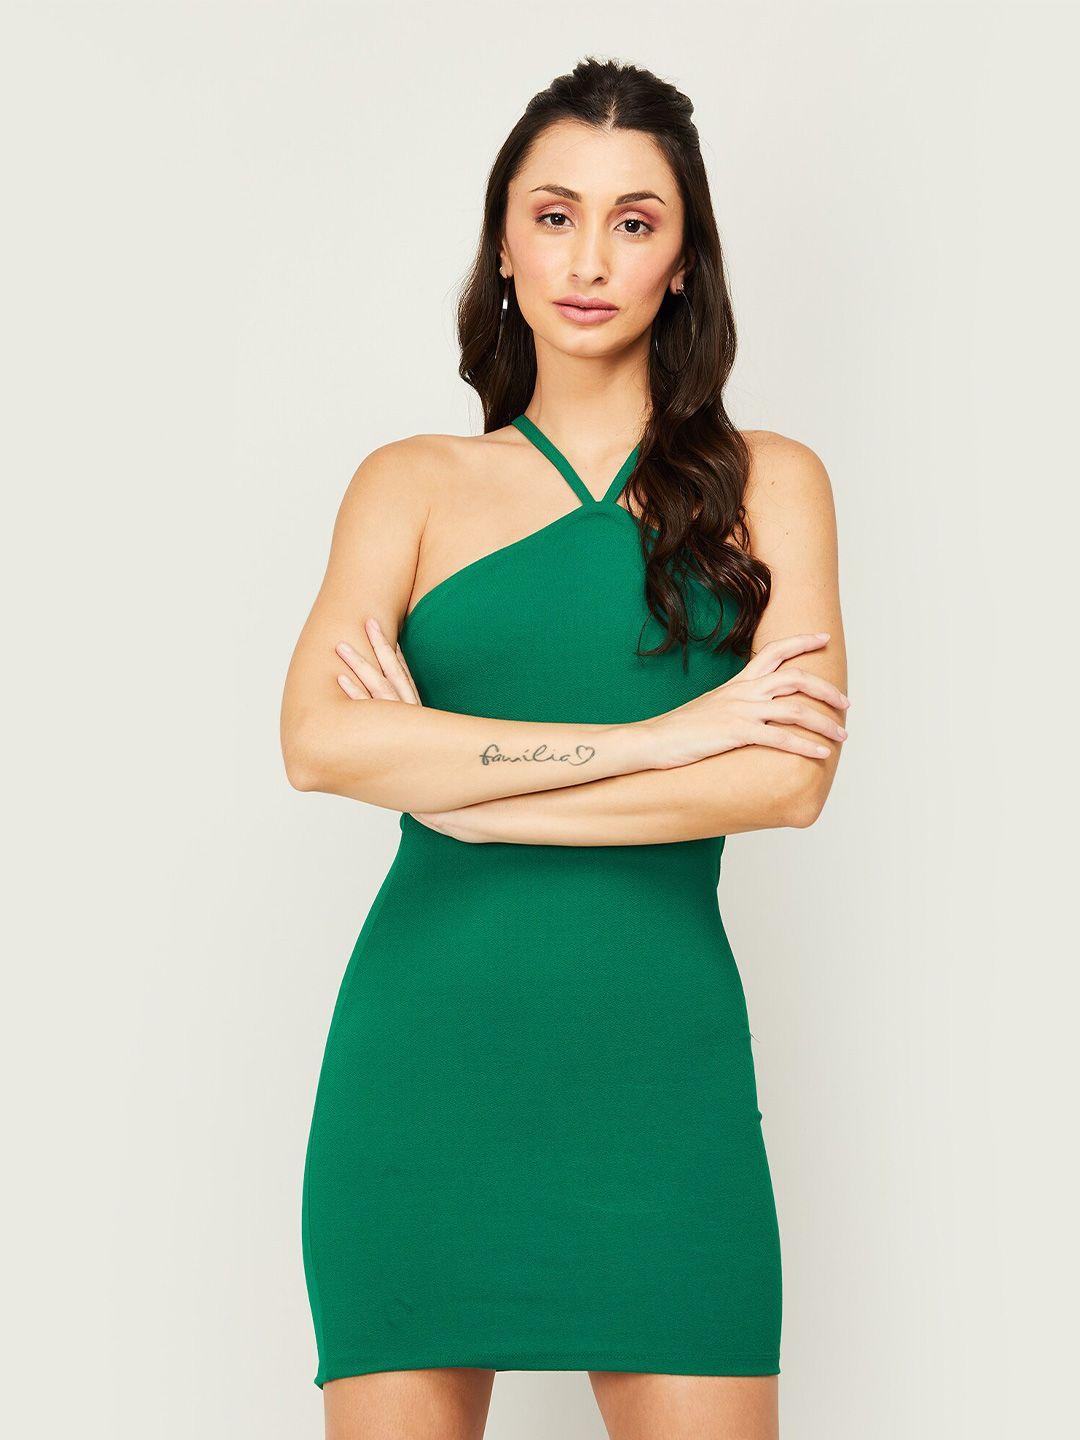 ginger-by-lifestyle-shoulder-strap-bodycon-mini-dress